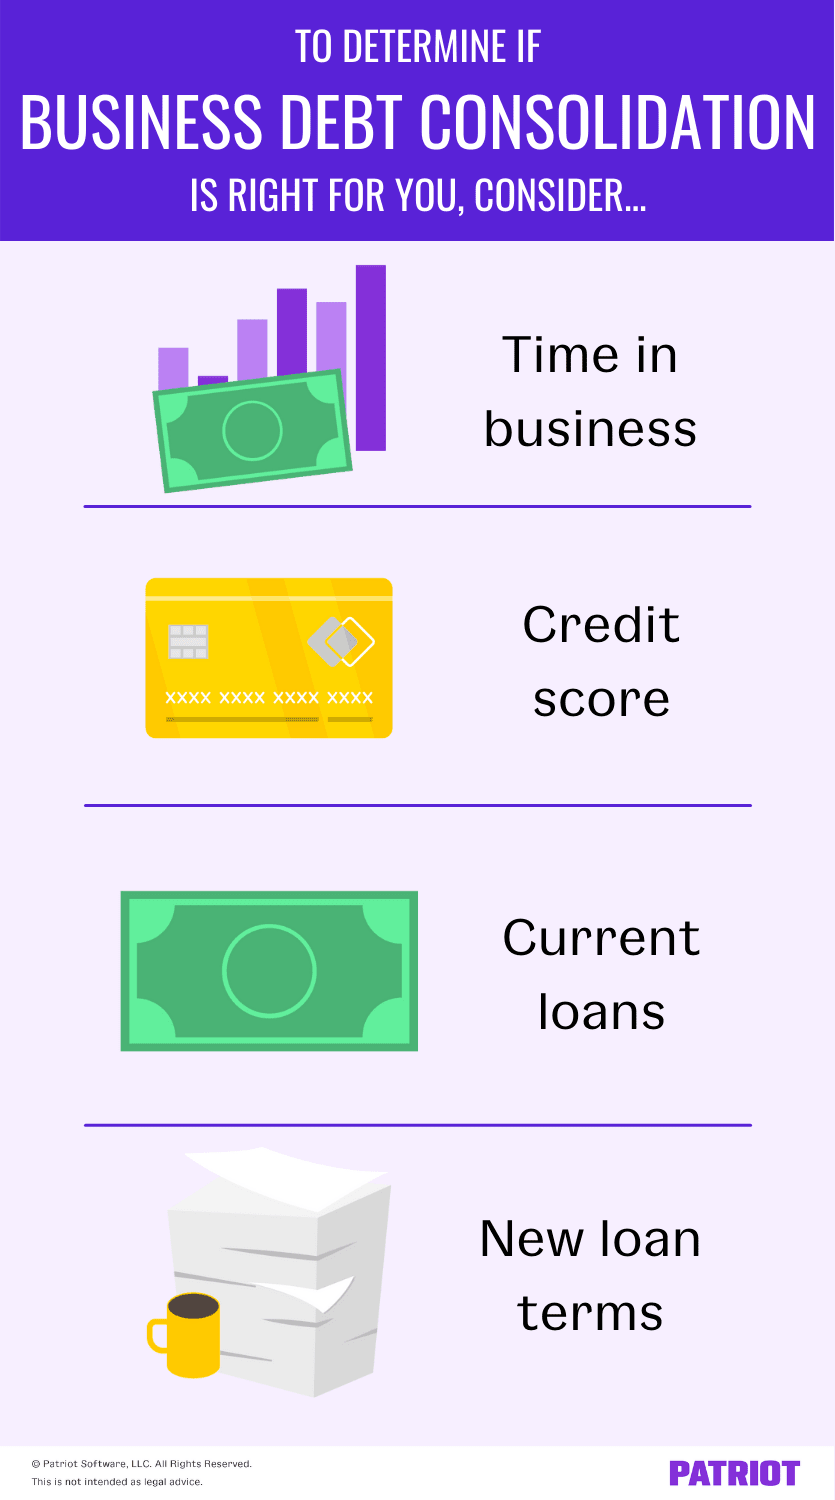 to determine if business debt consolidation is right for you, consider: 1) Time in business 2) Credit score 3) Current loans 4) New loan terms